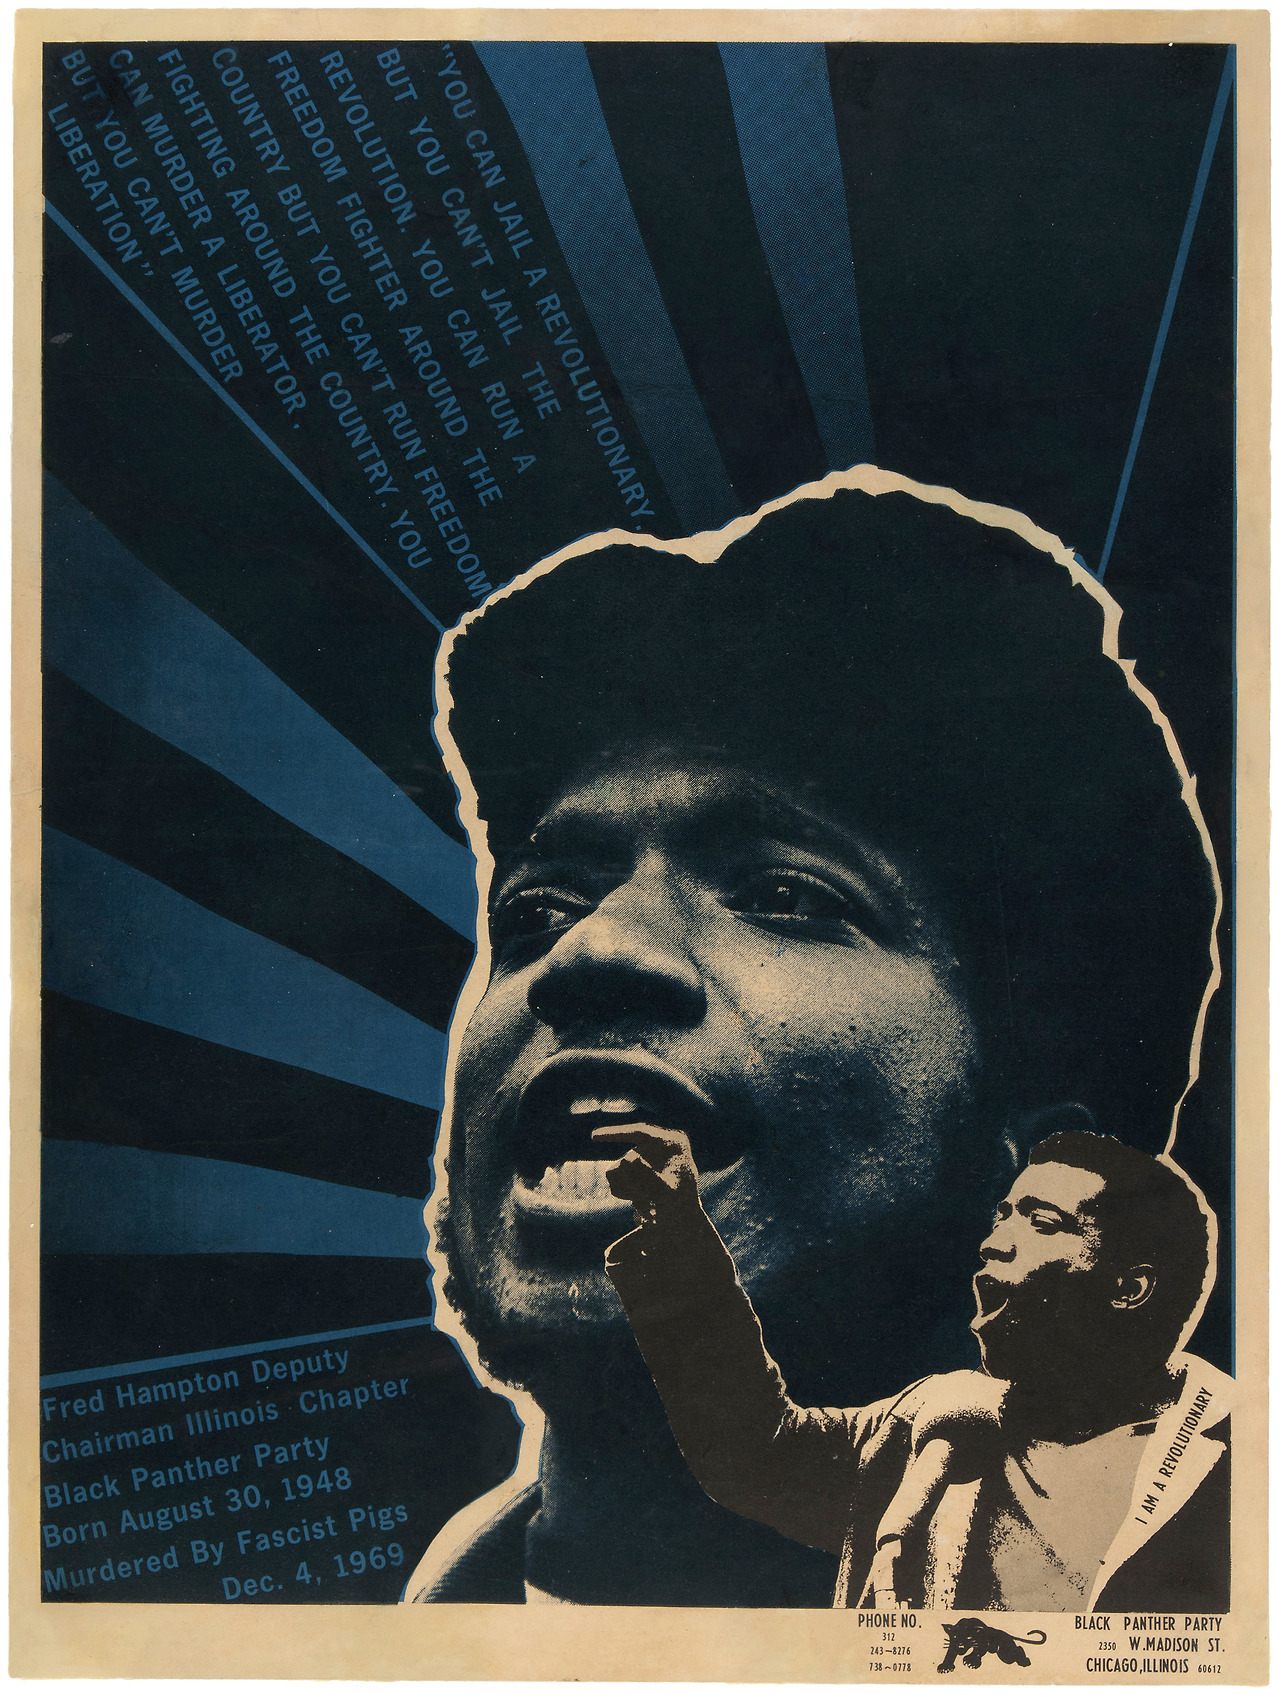 soldiers-of-war:  Black Panther Party posters, by Emory Douglas. Emory Douglas joined